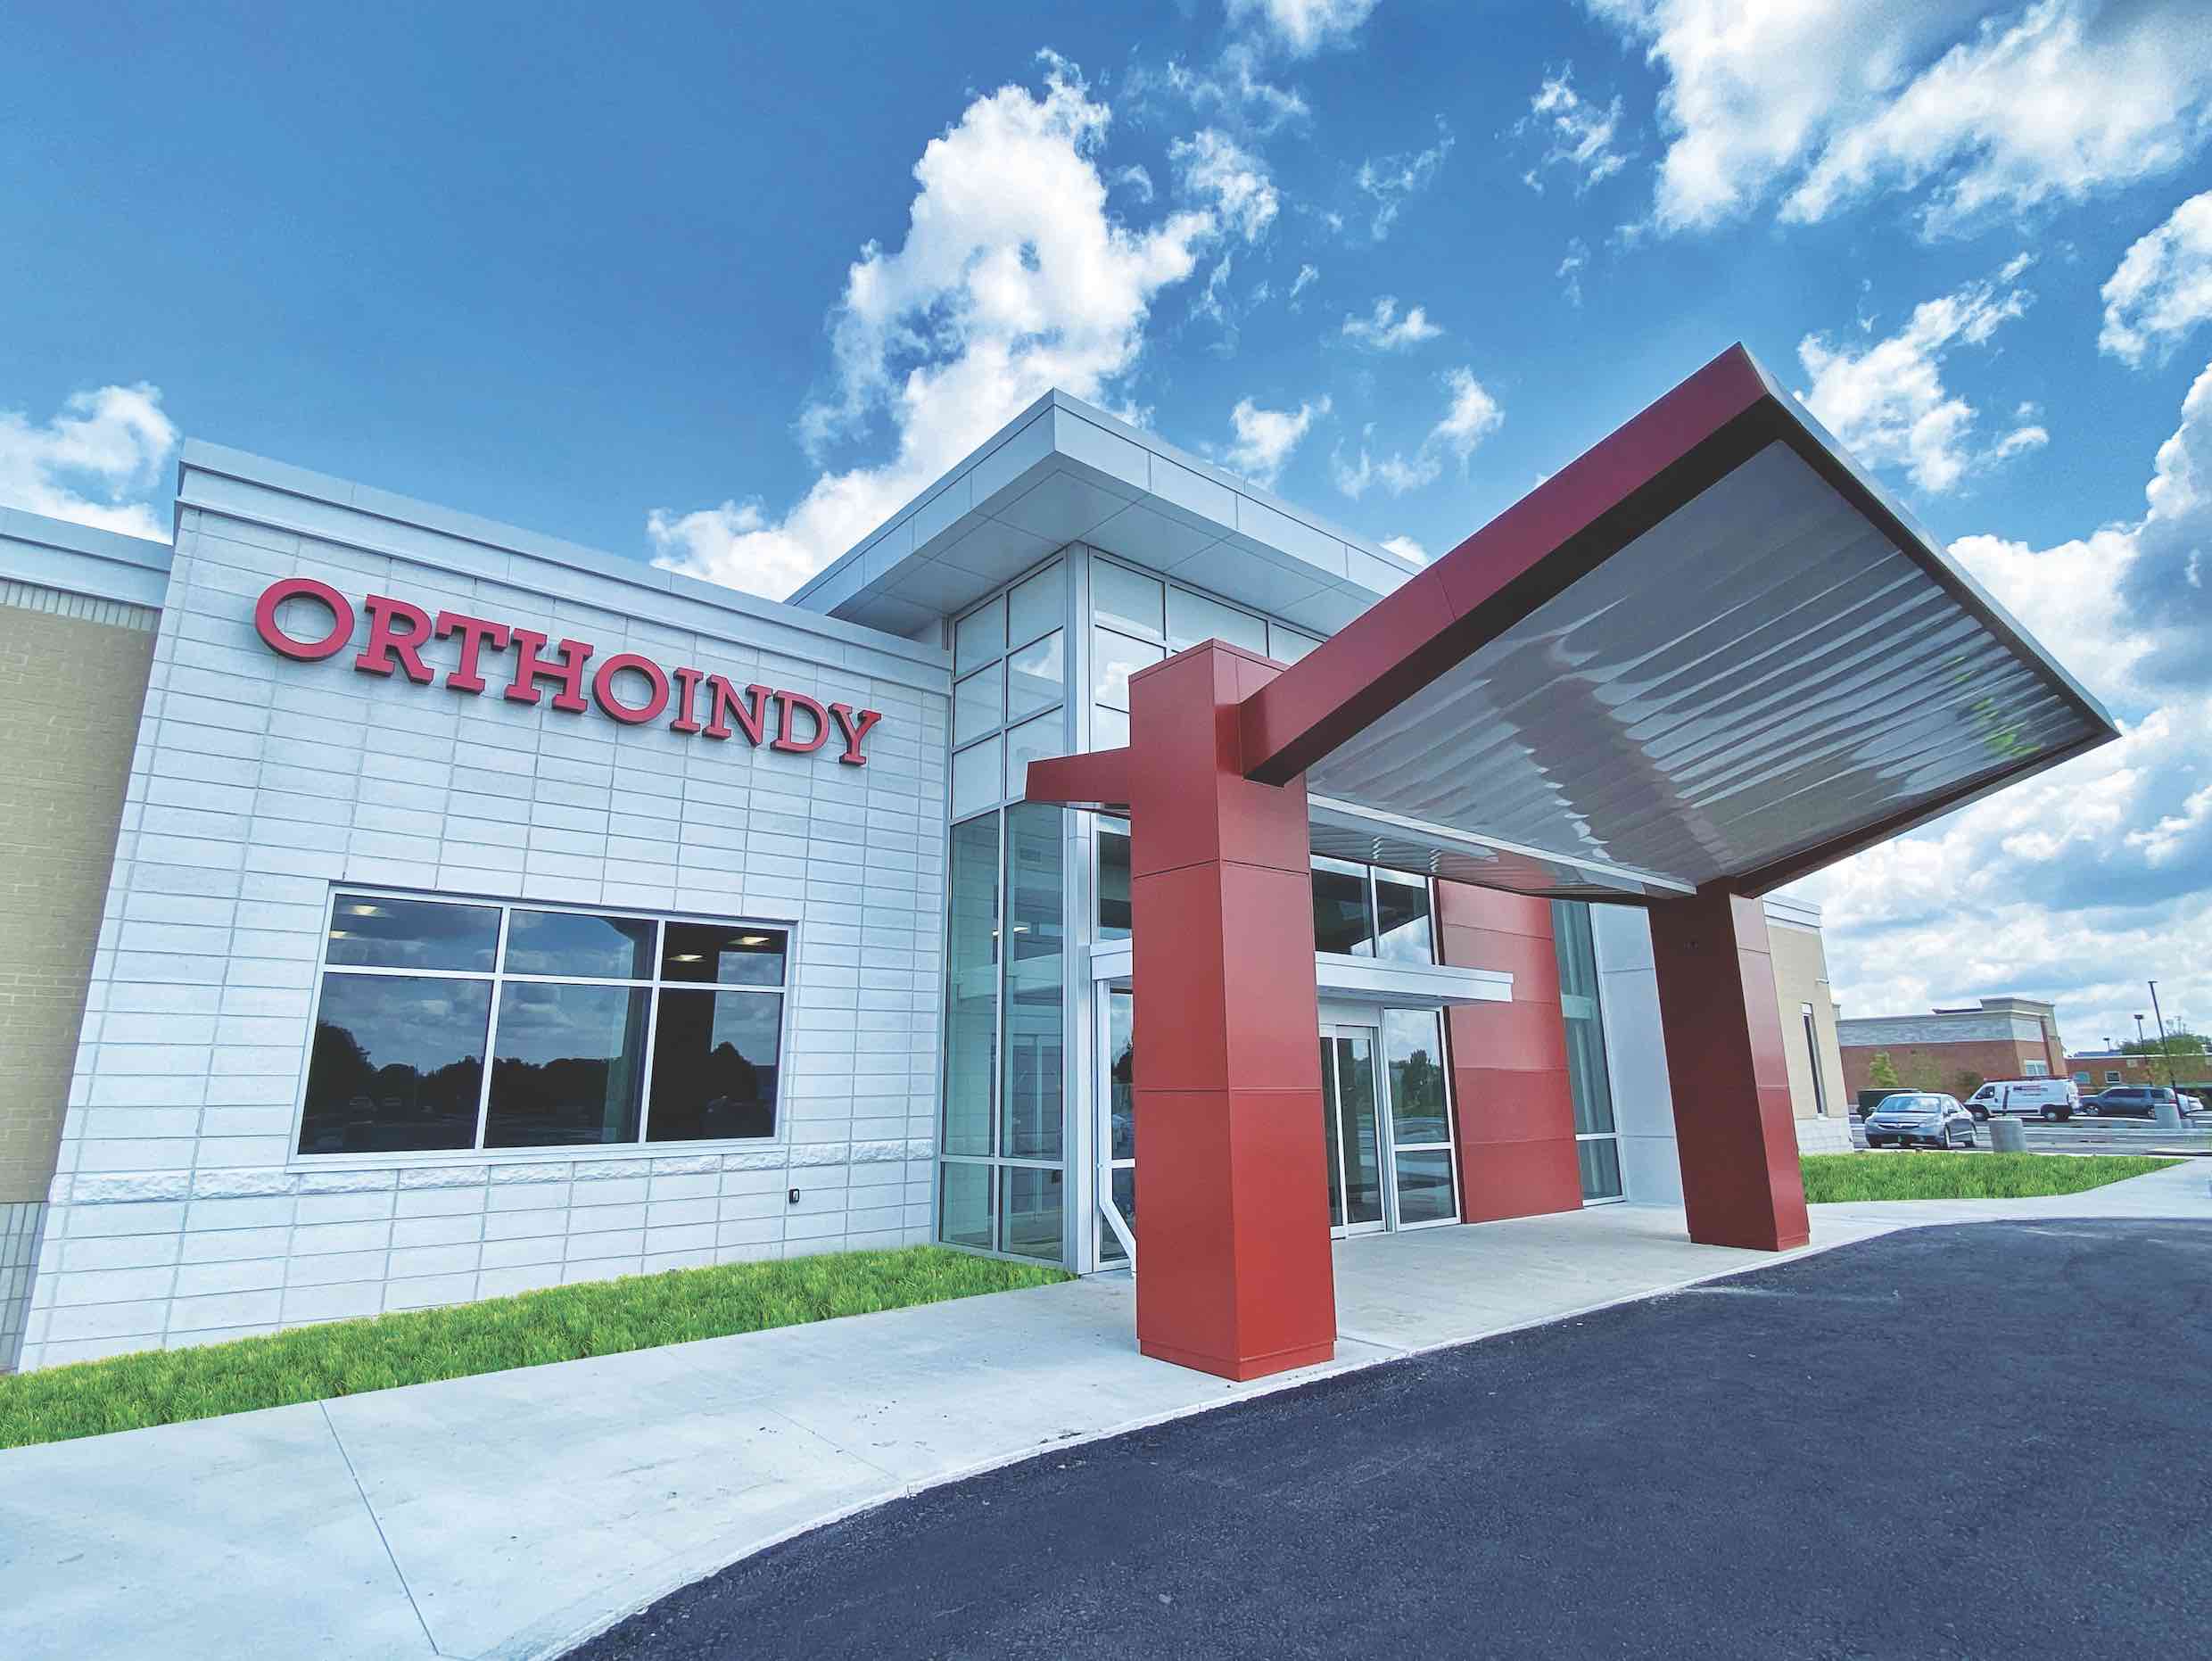 OrthoIndy Westfield location